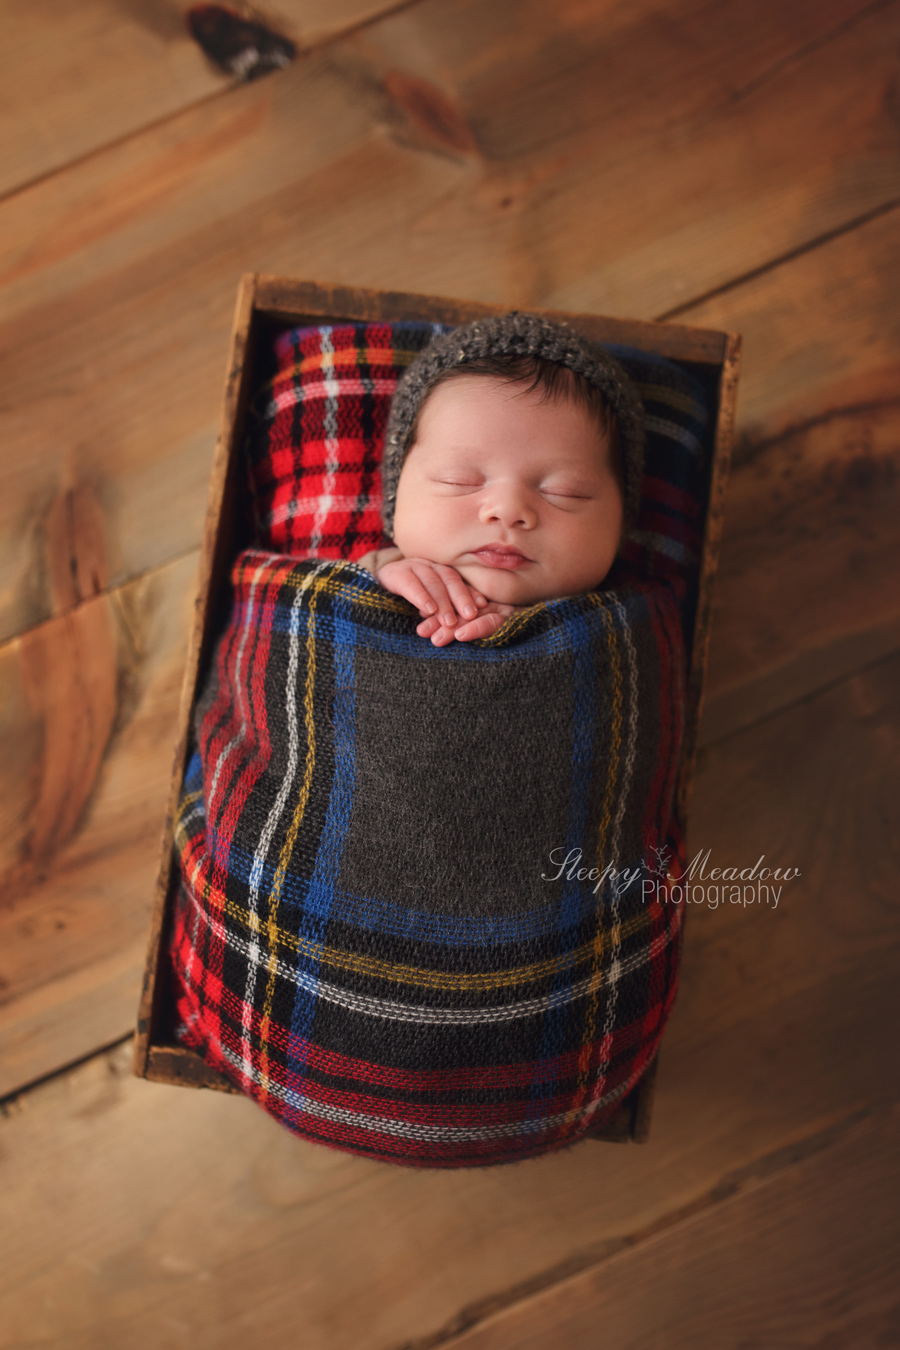 Newborn boy poses in a box for his first photo shoot by Sleepy Meadow Photography.